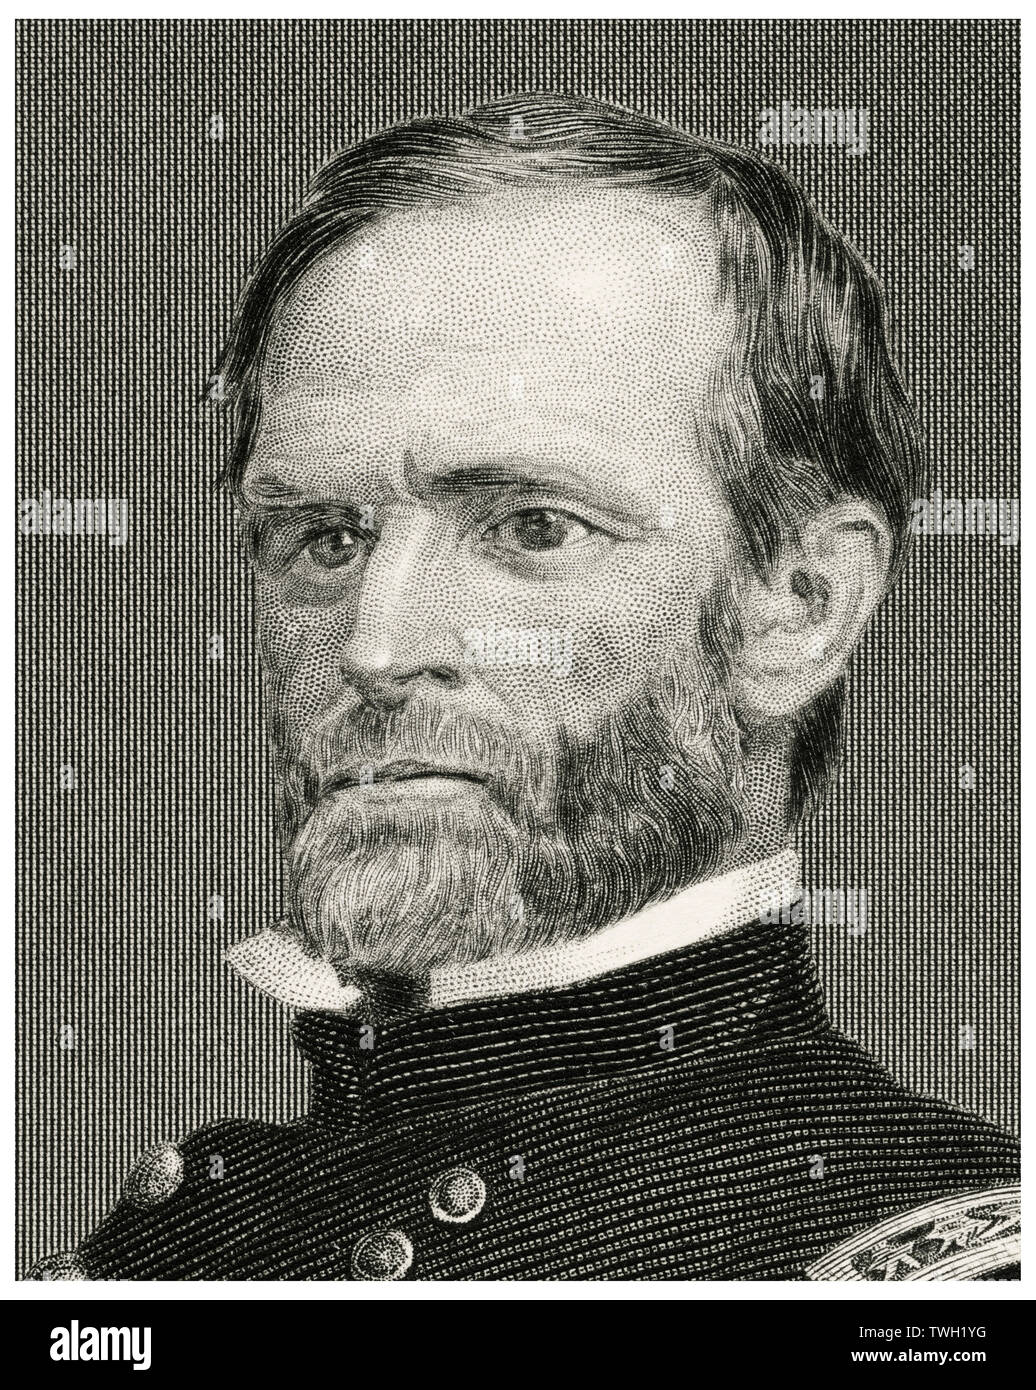 William Tecumseh Sherman (1820-91), Union General During American Civil War, Head and Shoulders Portrait, Steel Engraving, Portrait Gallery of Eminent Men and Women of Europe and America by Evert A. Duyckinck, Published by Henry J. Johnson, Johnson, Wilson & Company, New York, 1873 Stock Photo